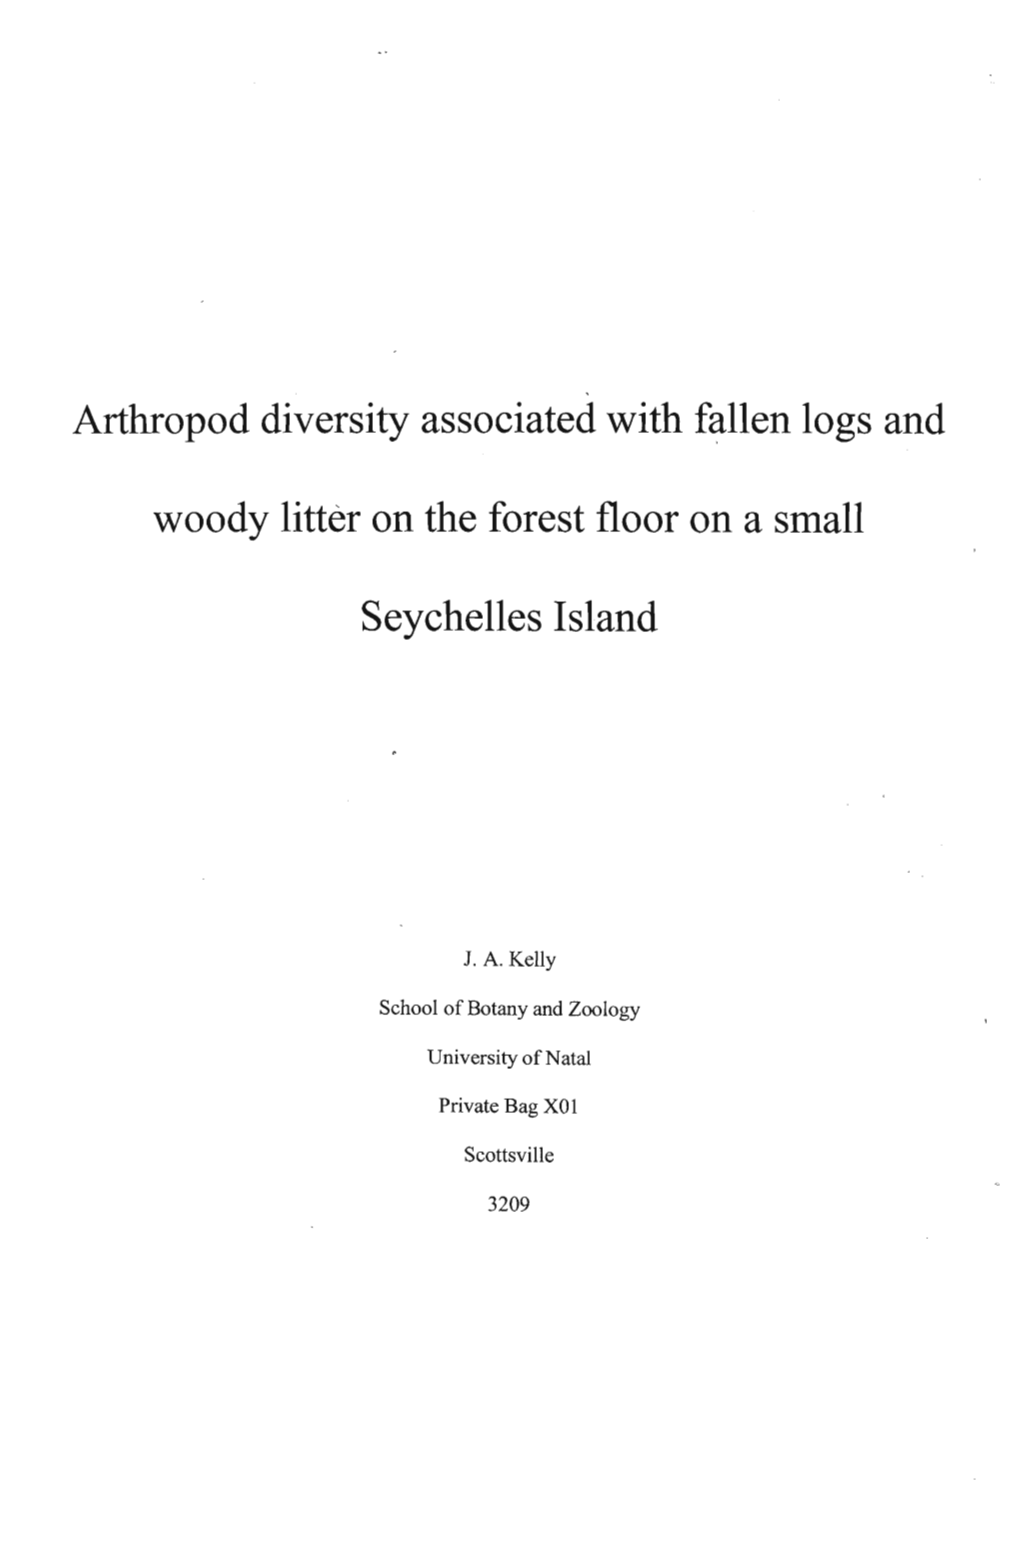 Arthropod Diversity Associated with Fallen Logs and Woody Litter on the Forest Floor on a Small Seychelles Island JA Kelly